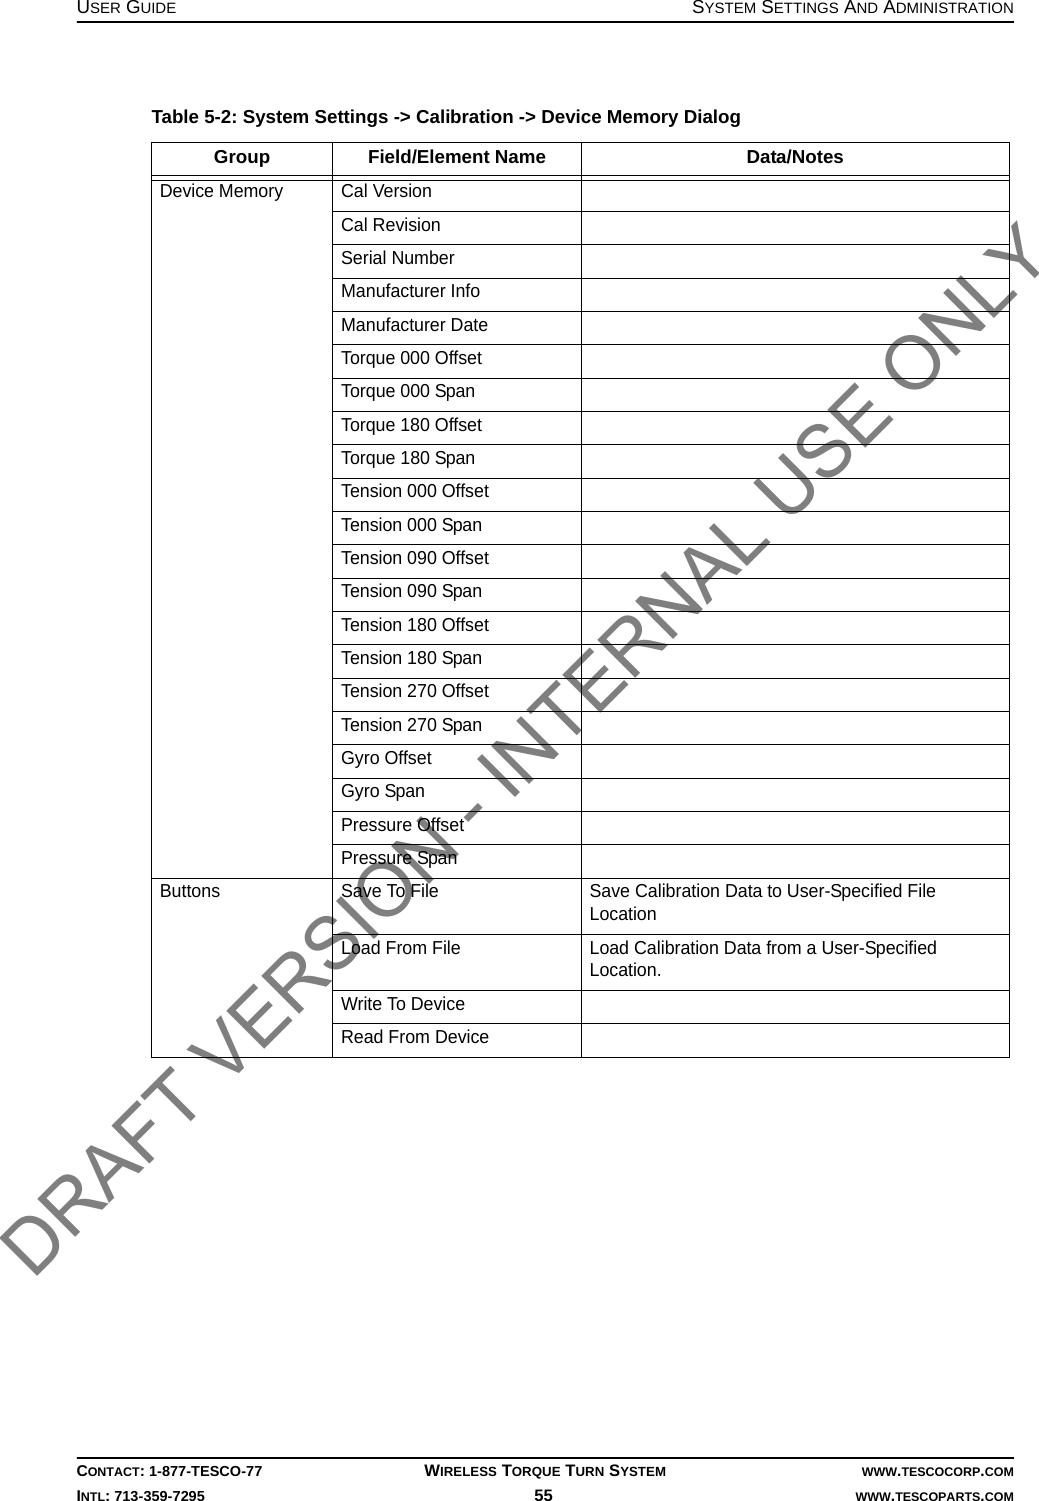 USER GUIDE SYSTEM SETTINGS AND ADMINISTRATIONCONTACT: 1-877-TESCO-77 WIRELESS TORQUE TURN SYSTEM WWW.TESCOCORP.COMINTL: 713-359-7295 55    WWW.TESCOPARTS.COMTable 5-2: System Settings -&gt; Calibration -&gt; Device Memory Dialog Group Field/Element Name Data/NotesDevice Memory Cal VersionCal RevisionSerial NumberManufacturer InfoManufacturer DateTorque 000 OffsetTorque 000 SpanTorque 180 OffsetTorque 180 SpanTension 000 OffsetTension 000 SpanTension 090 OffsetTension 090 SpanTension 180 OffsetTension 180 SpanTension 270 OffsetTension 270 SpanGyro OffsetGyro SpanPressure OffsetPressure SpanButtons Save To File Save Calibration Data to User-Specified File LocationLoad From File Load Calibration Data from a User-Specified Location.Write To DeviceRead From DeviceDRAFT VERSION - INTERNAL USE ONLY